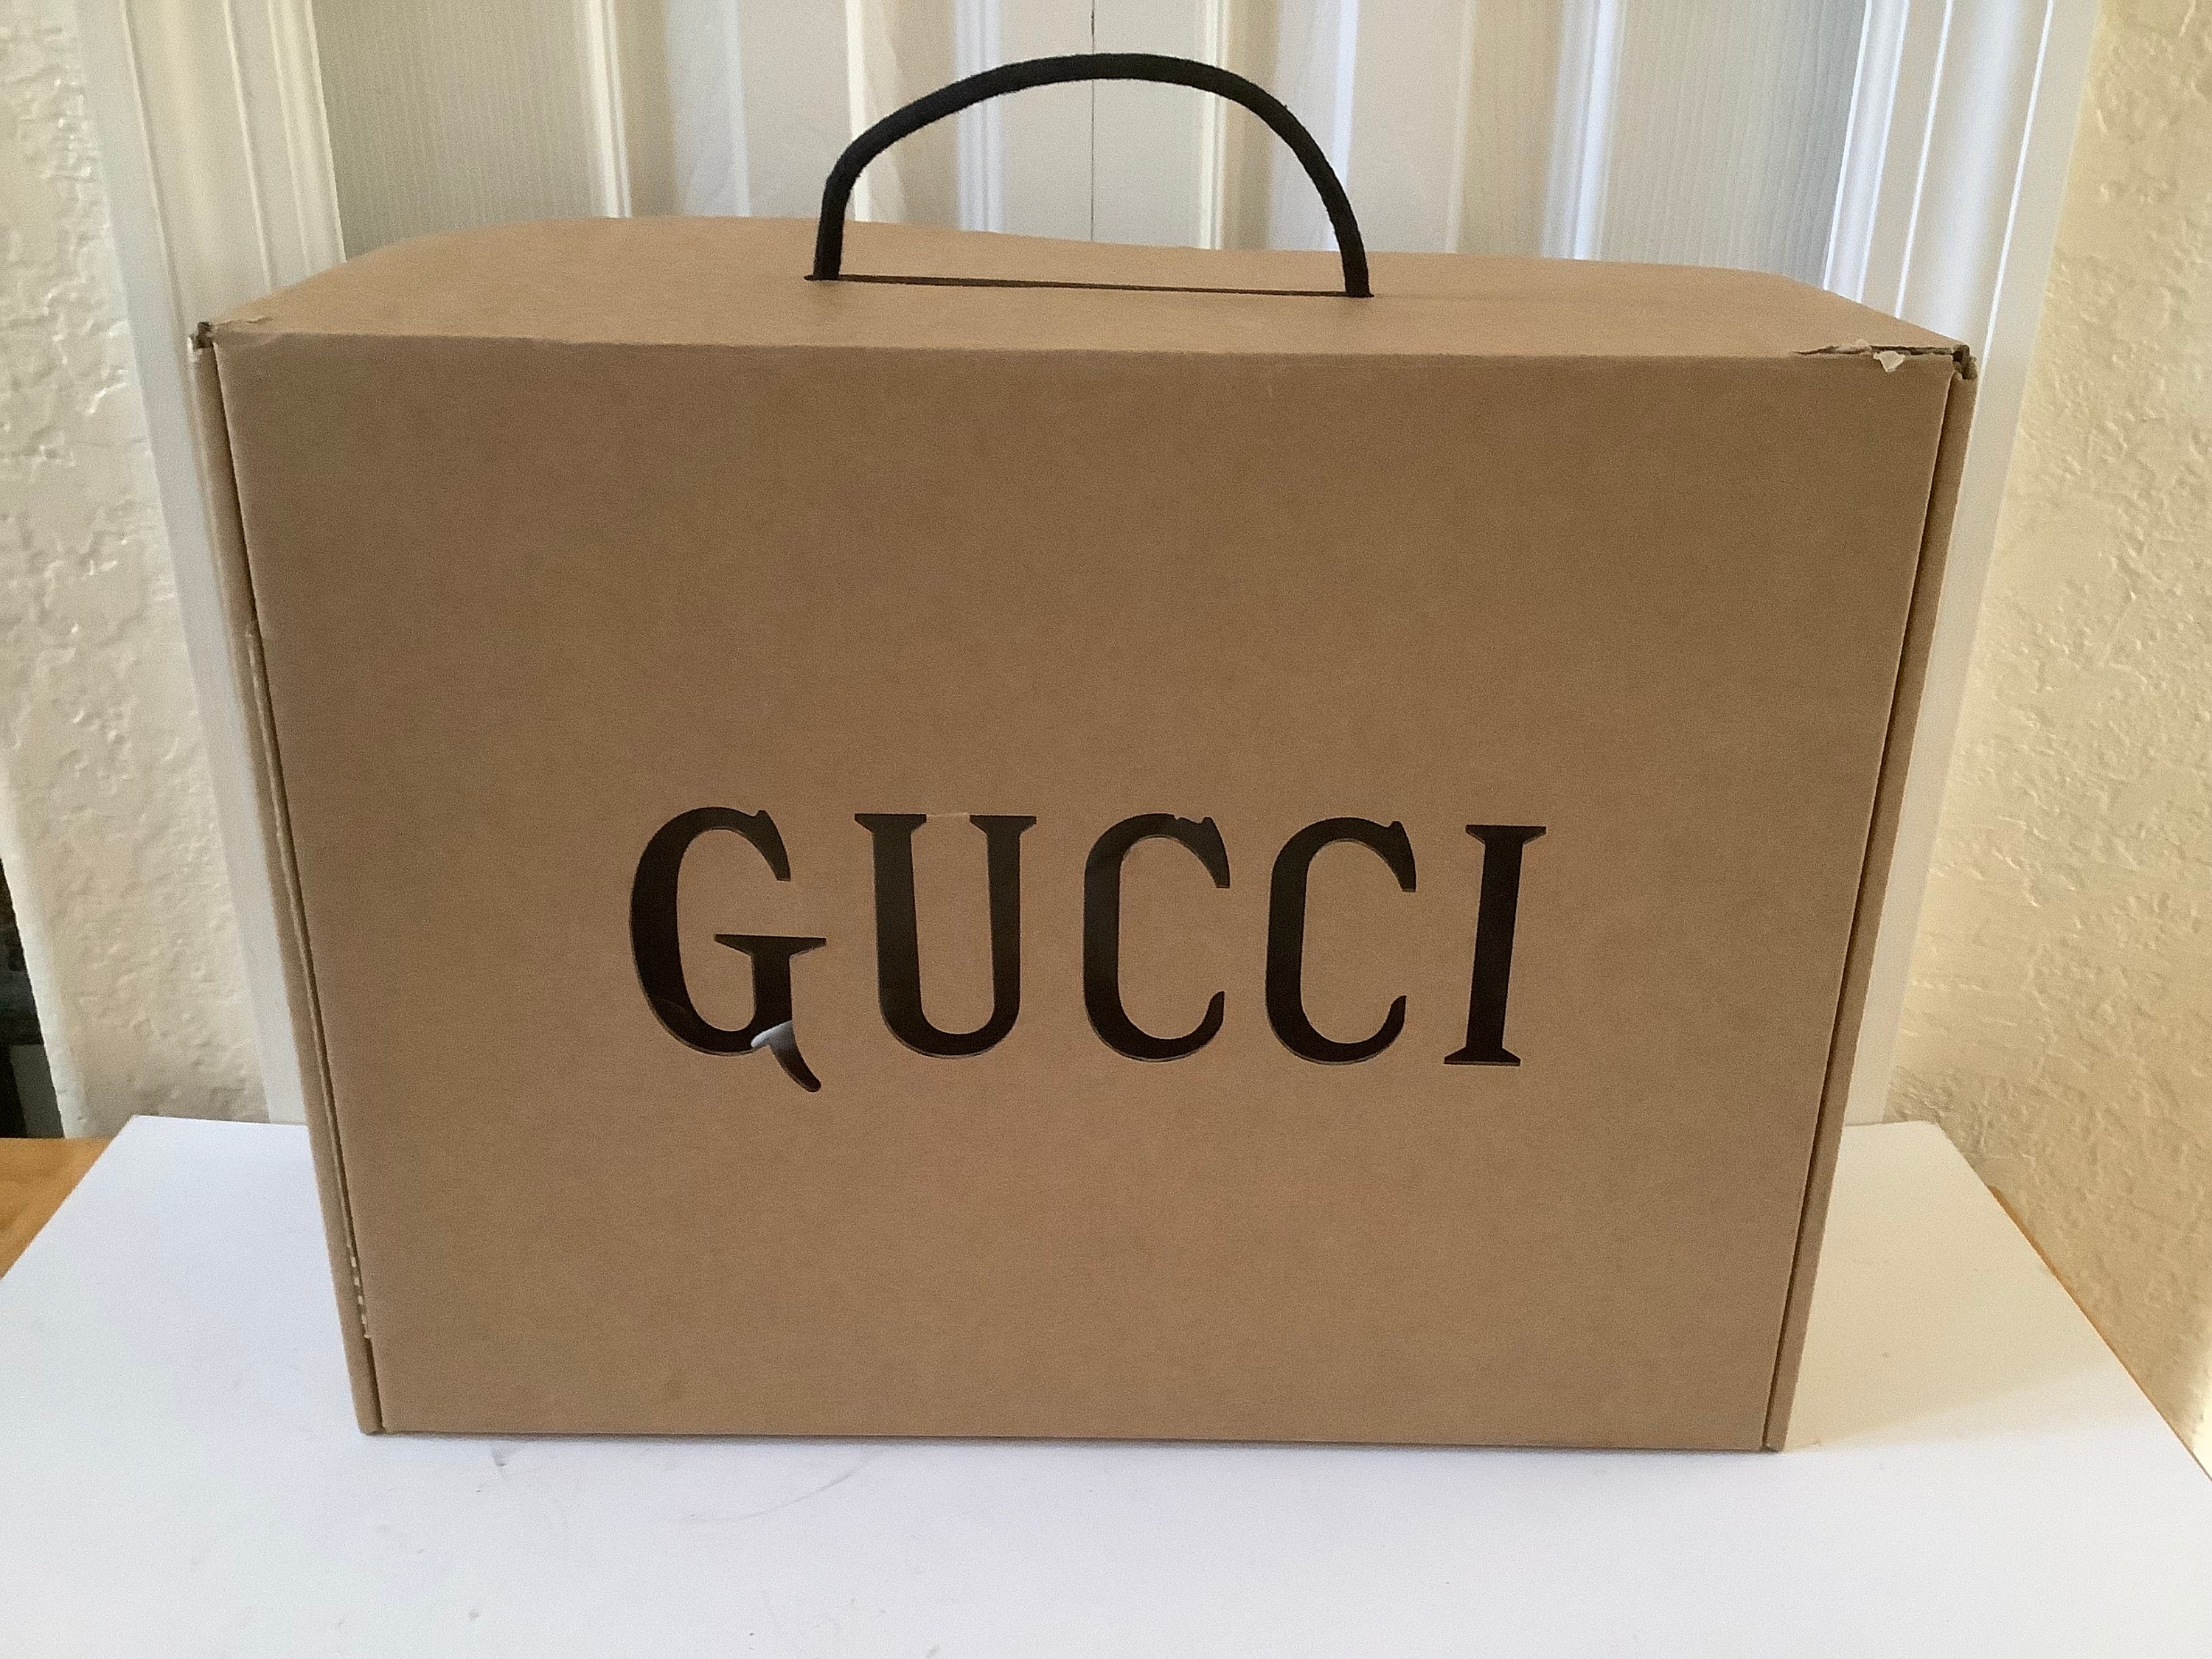 Gucci Inspired Wrapping Paper, Gucci Gift Wrap, Custom Gift Wrap